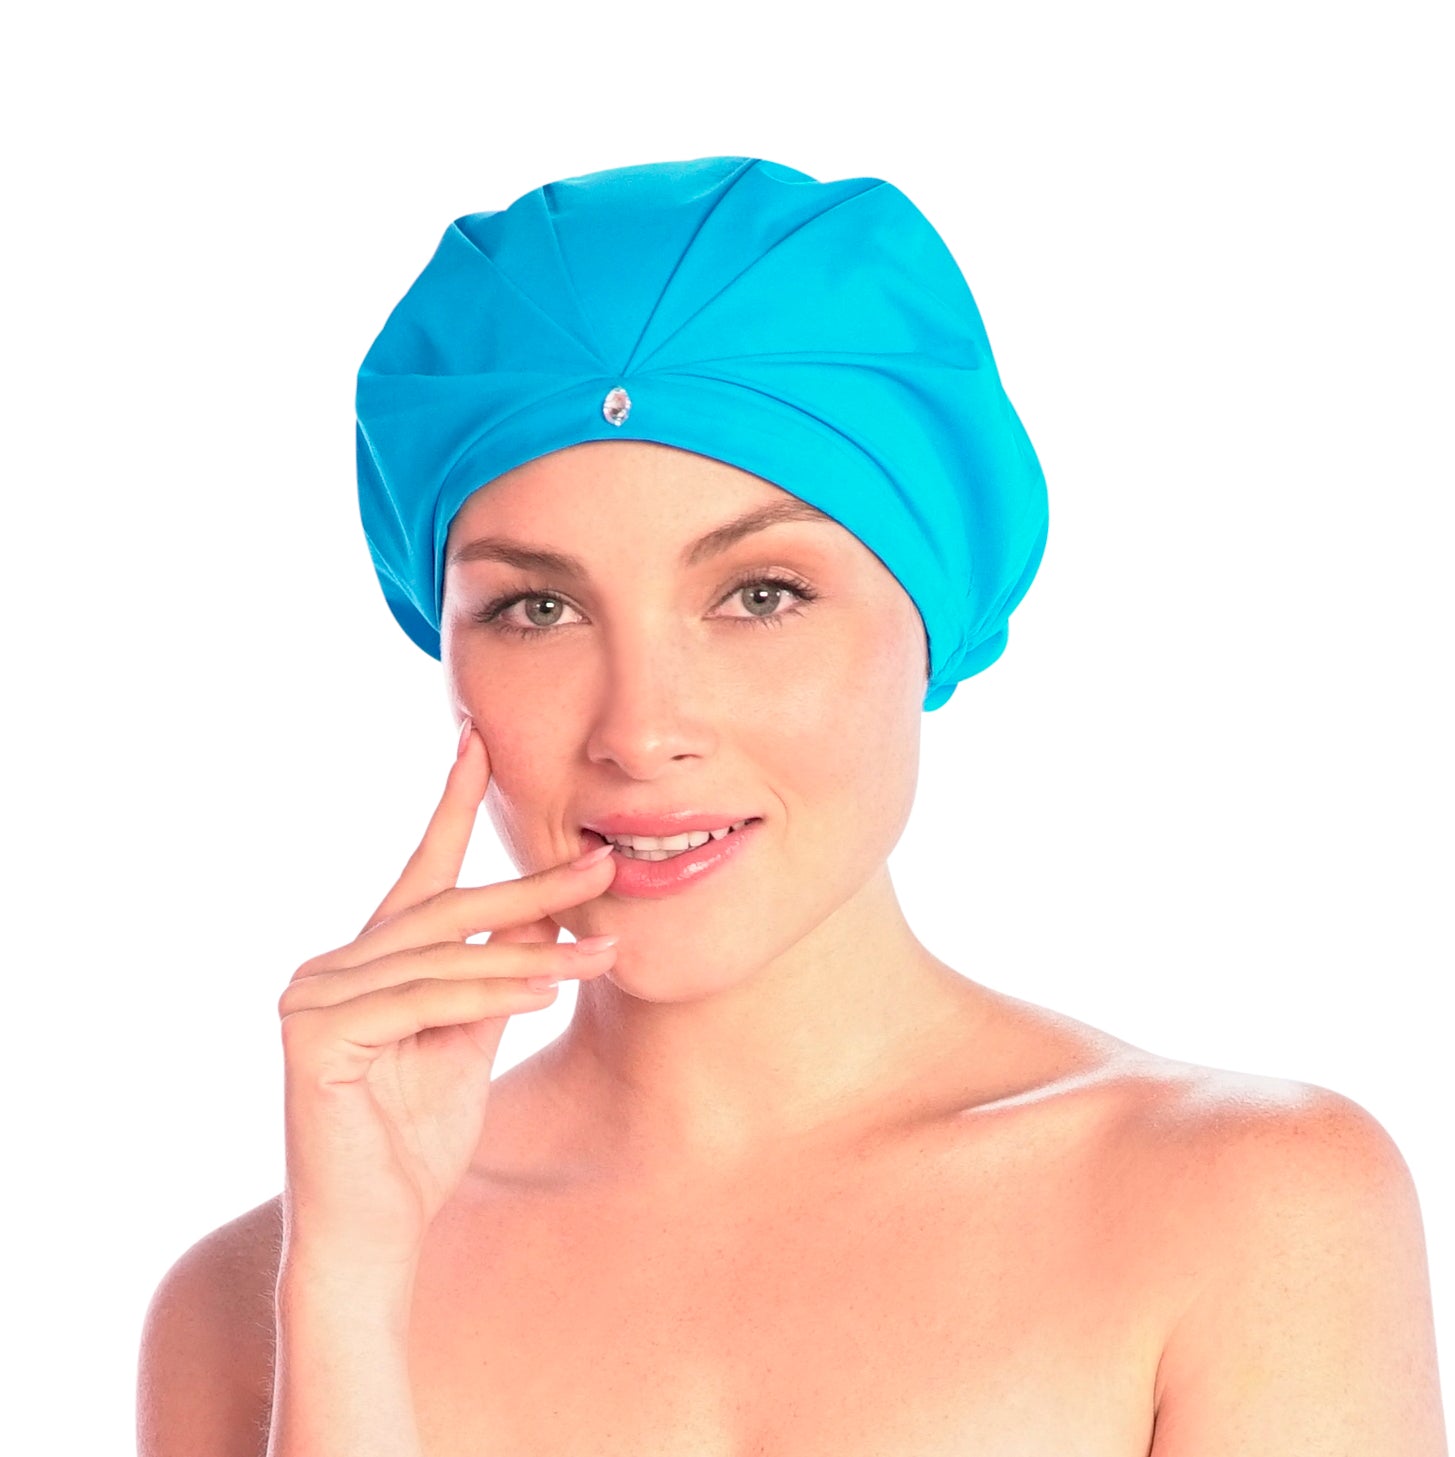 cute turban style shower cap for long hair women, waterproof breathable machine washable fabric stops frizzy in shhhower